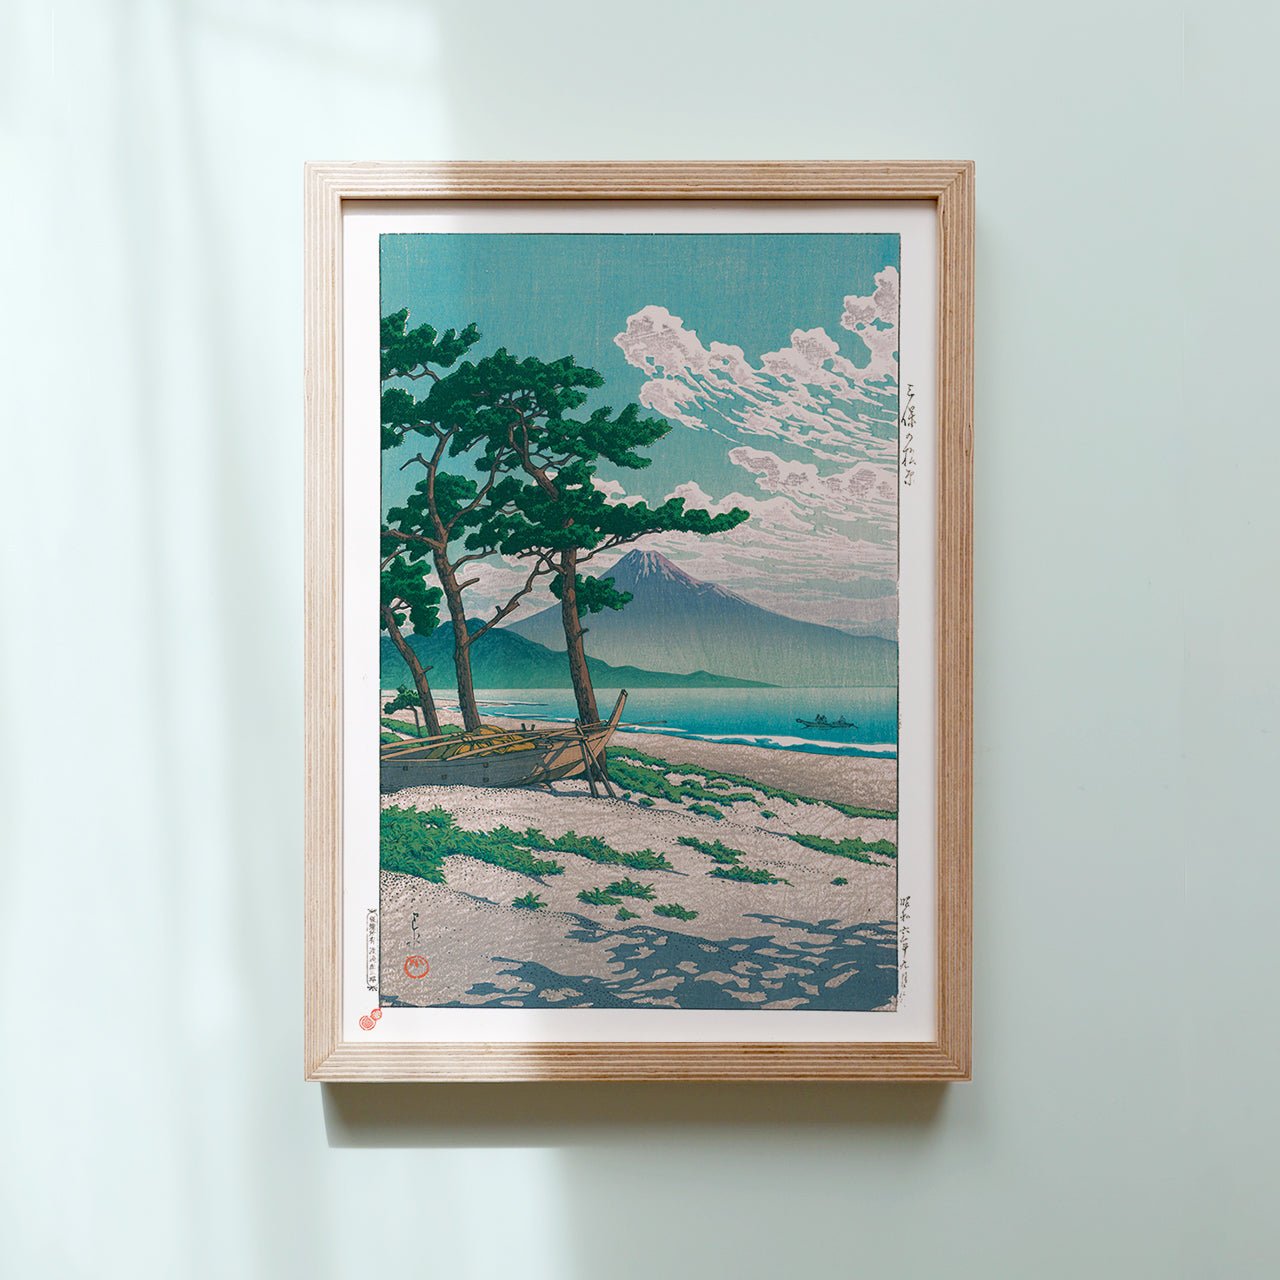 framed Japanese Art Poster by Kawase Hasui - Serene beach with pine trees and majestic mountain in the background